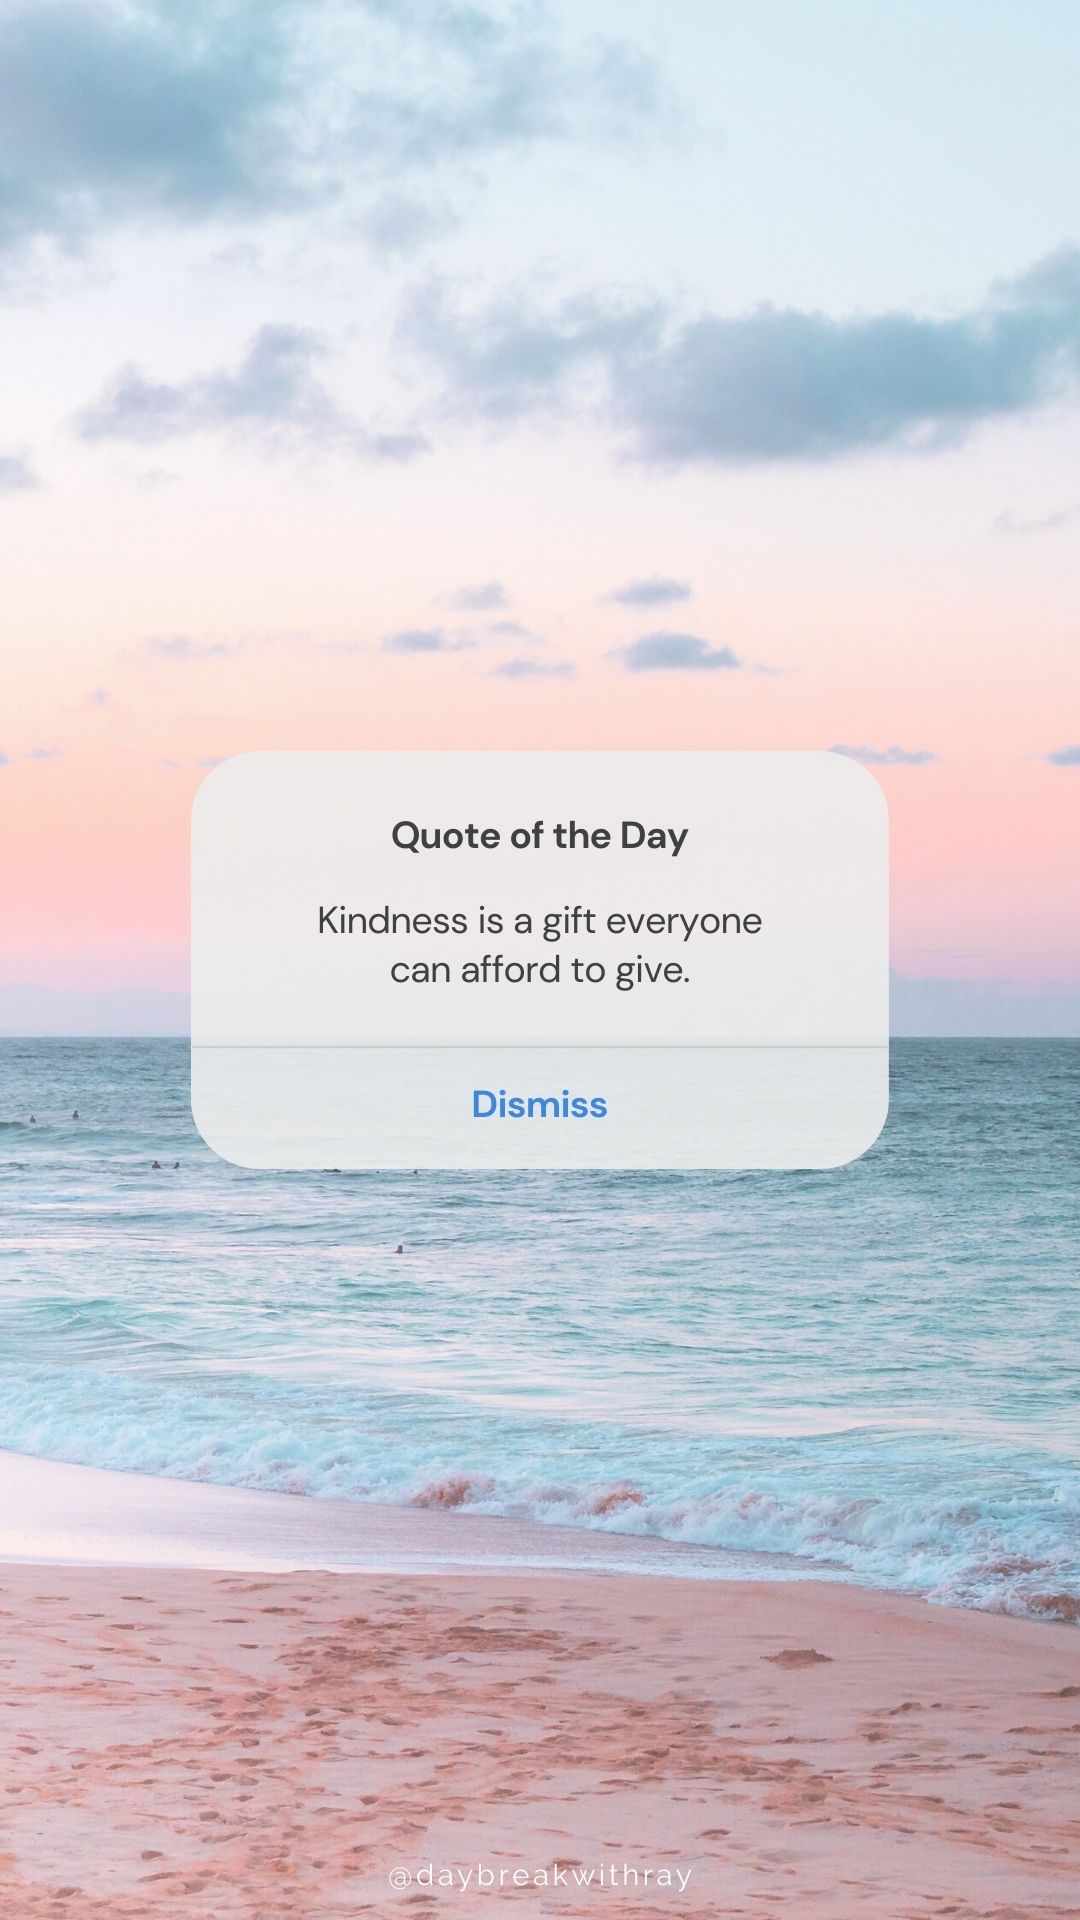 Looking for Kindness Quotes to share on World Kindness Day?